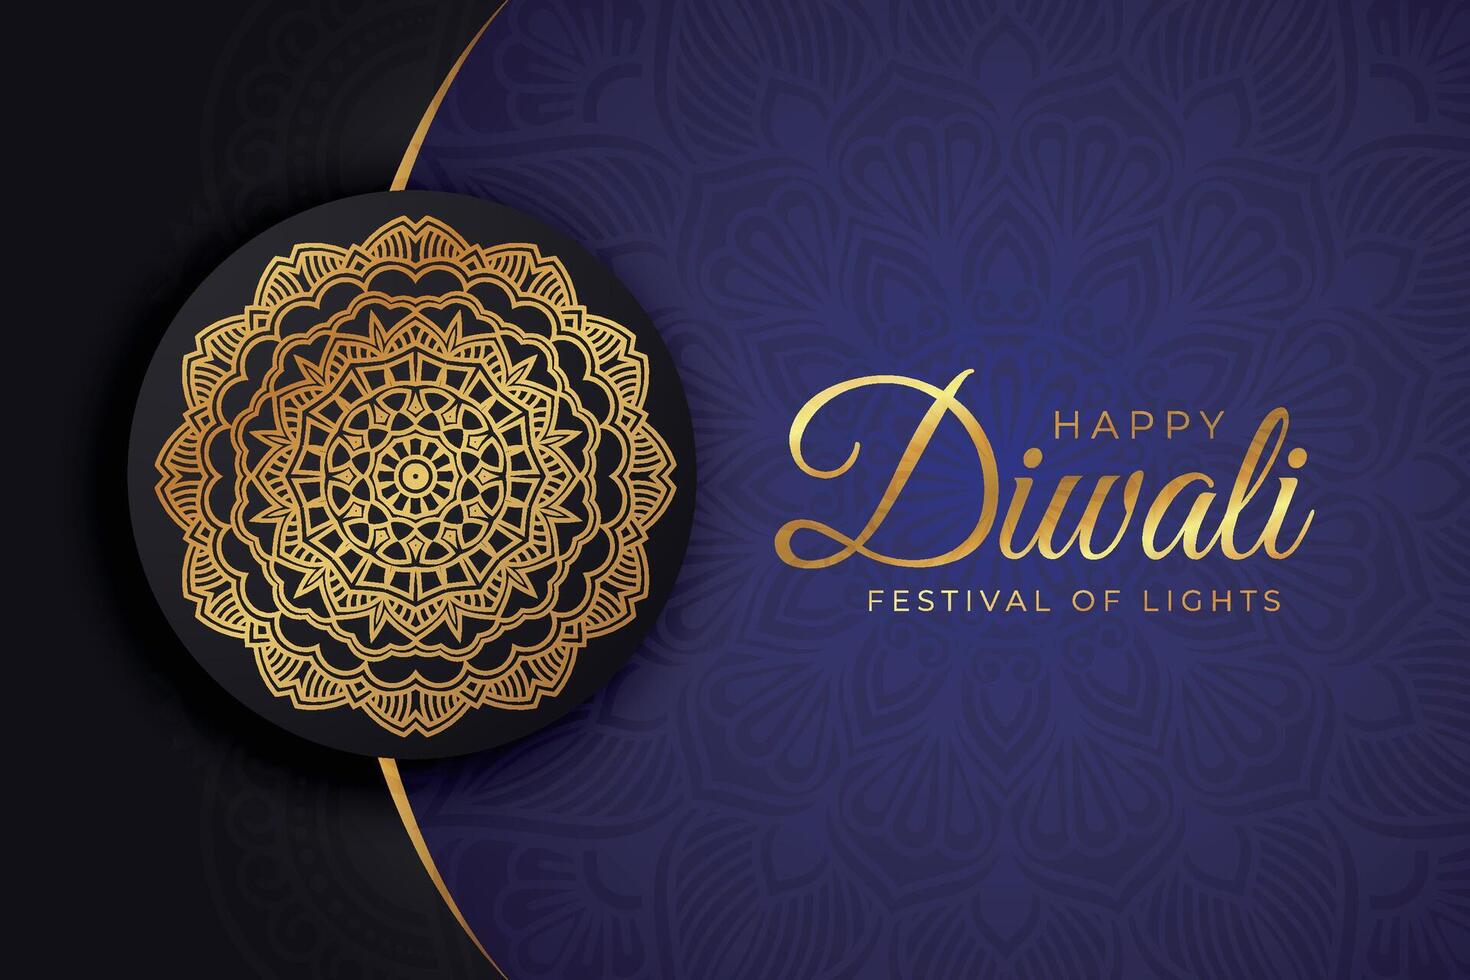 Diwali - Indian festival of lights, design template for postcards, invitations, greeting cards, posters, flyers, background and banner designs. vector